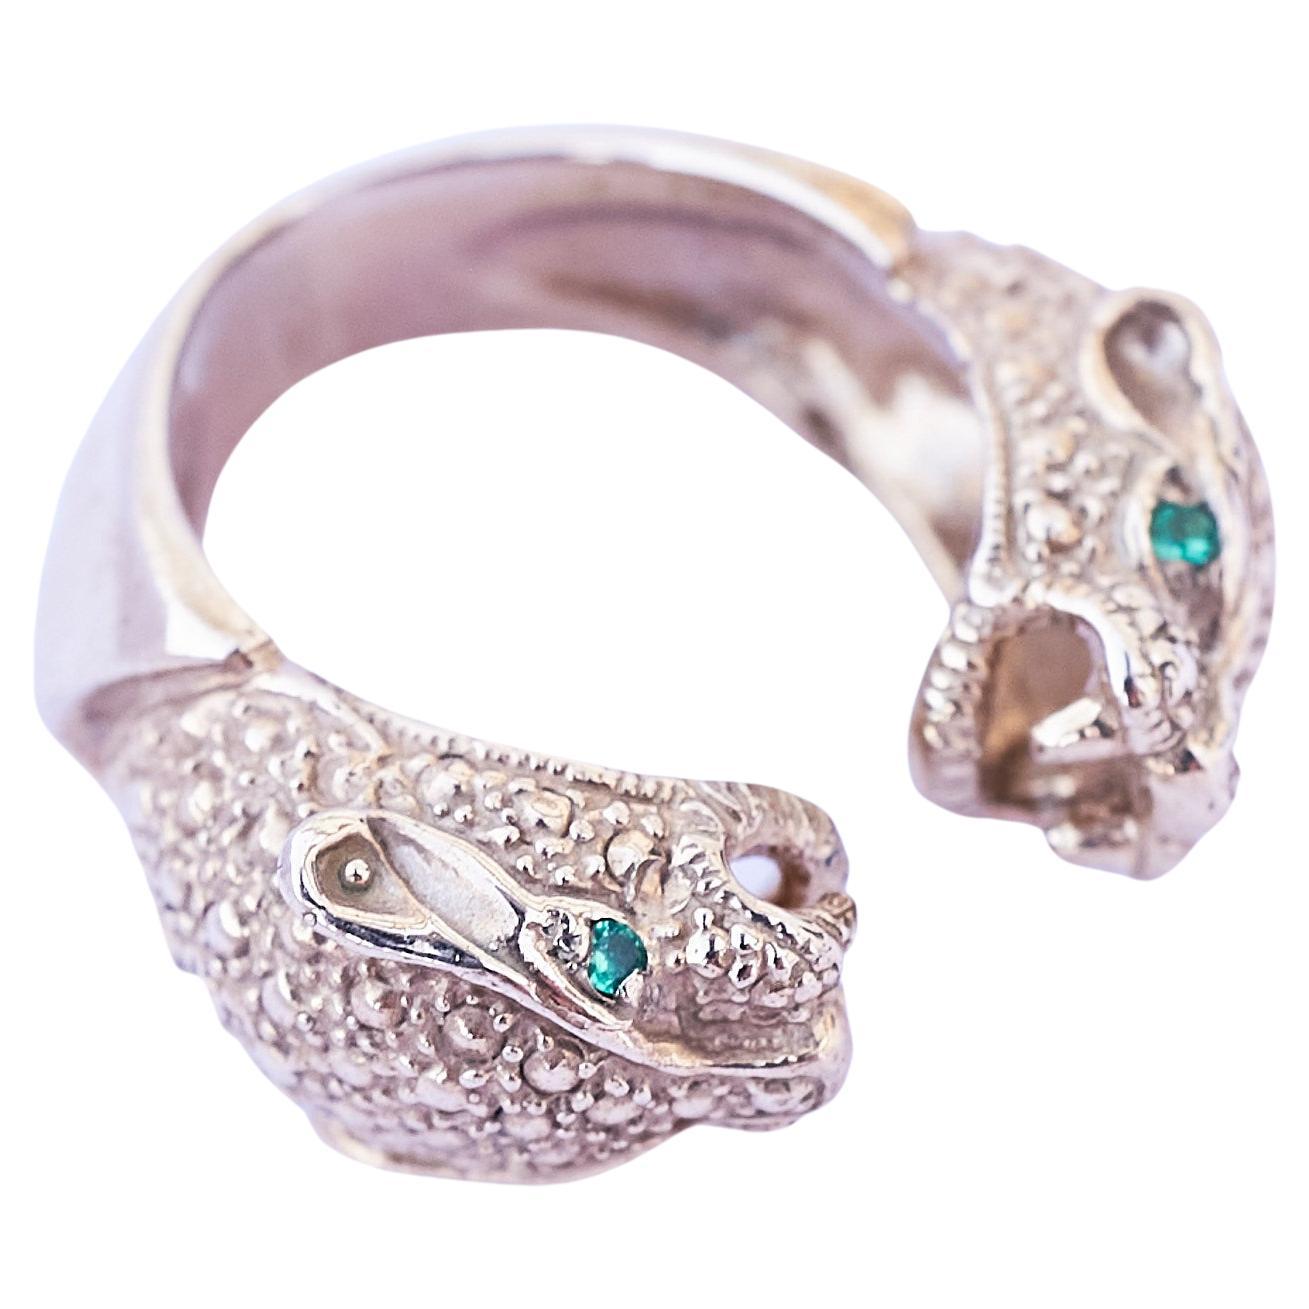 Contemporary Emerald Jaguar Panther Ring Bronze Cocktail Ring Animal Jewelry j Dauphin For Sale